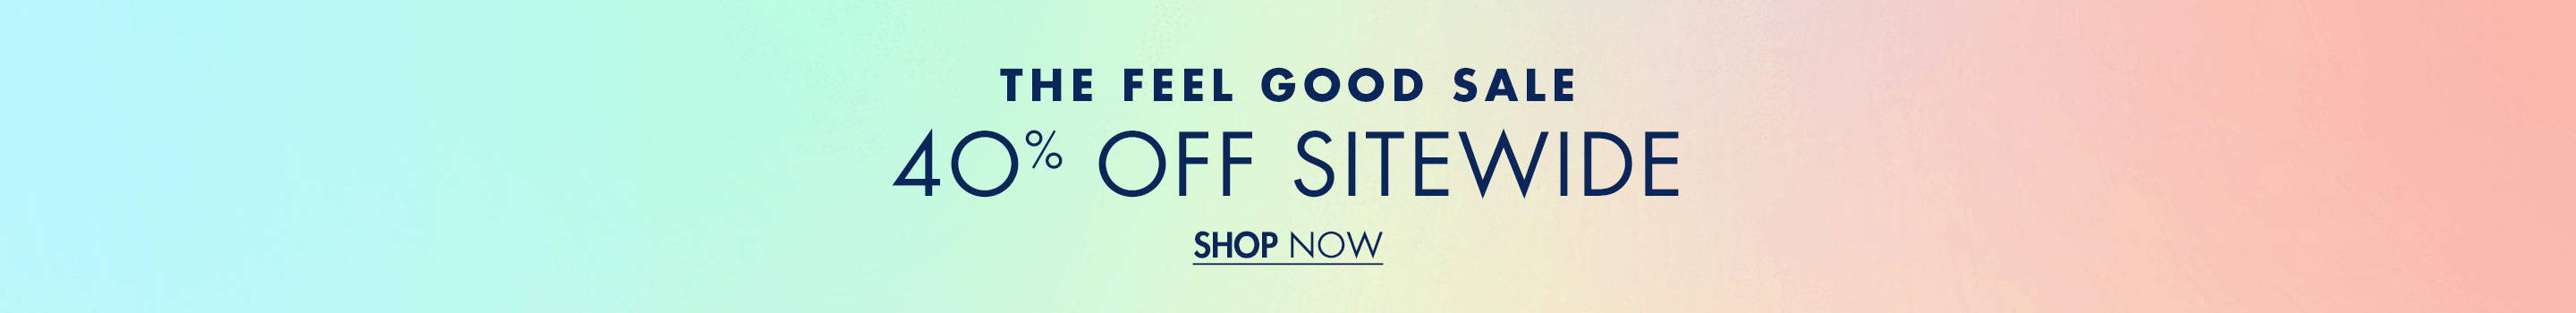 40% Off Sitewide